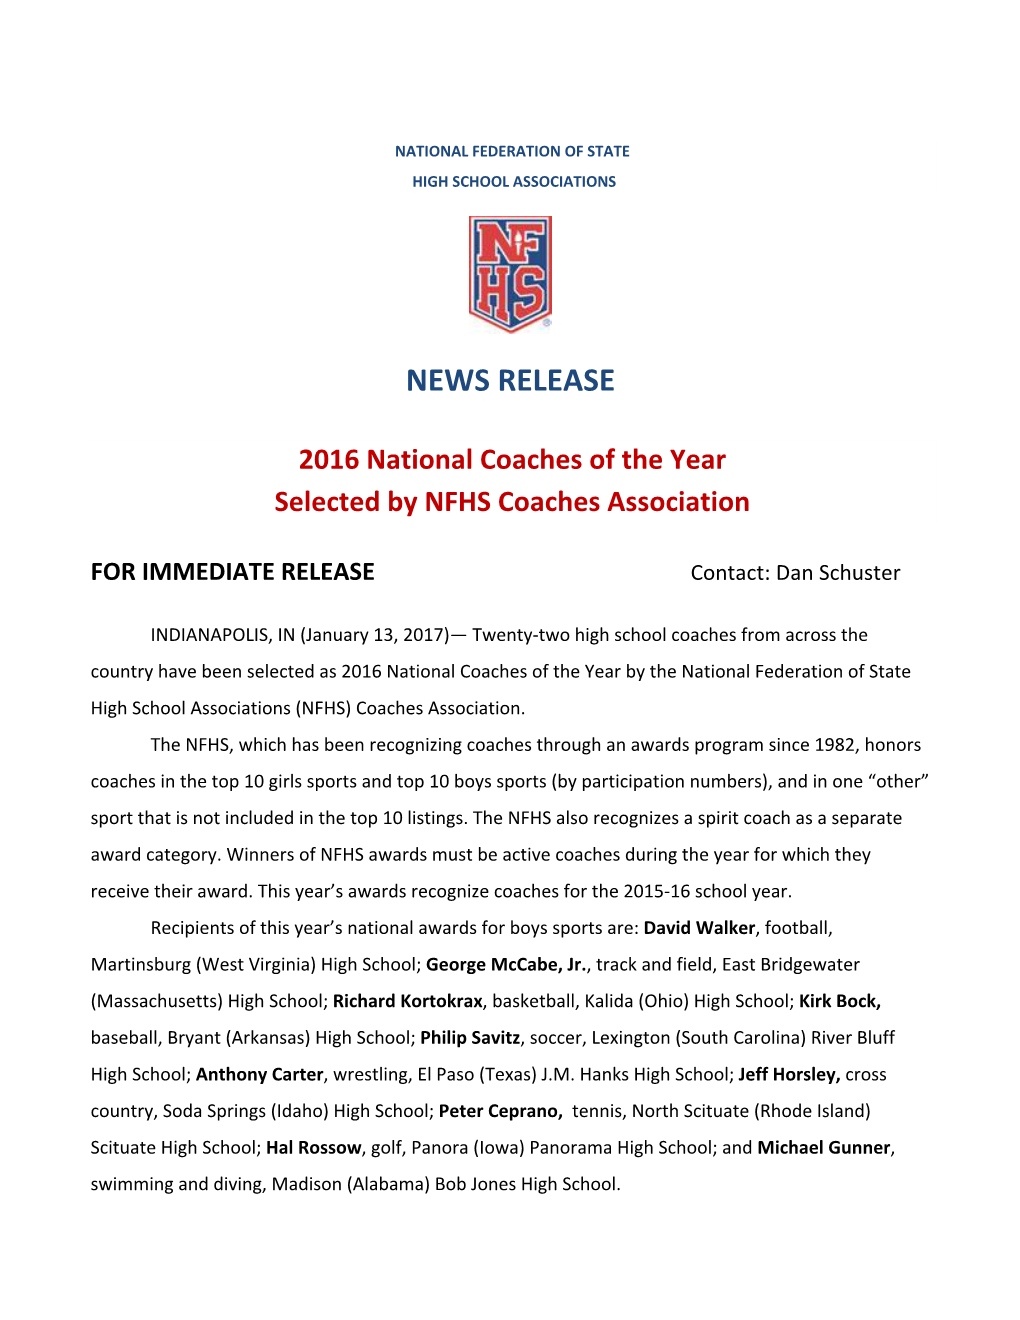 2016 National Coaches of the Year Selected by NFHS Coaches Association